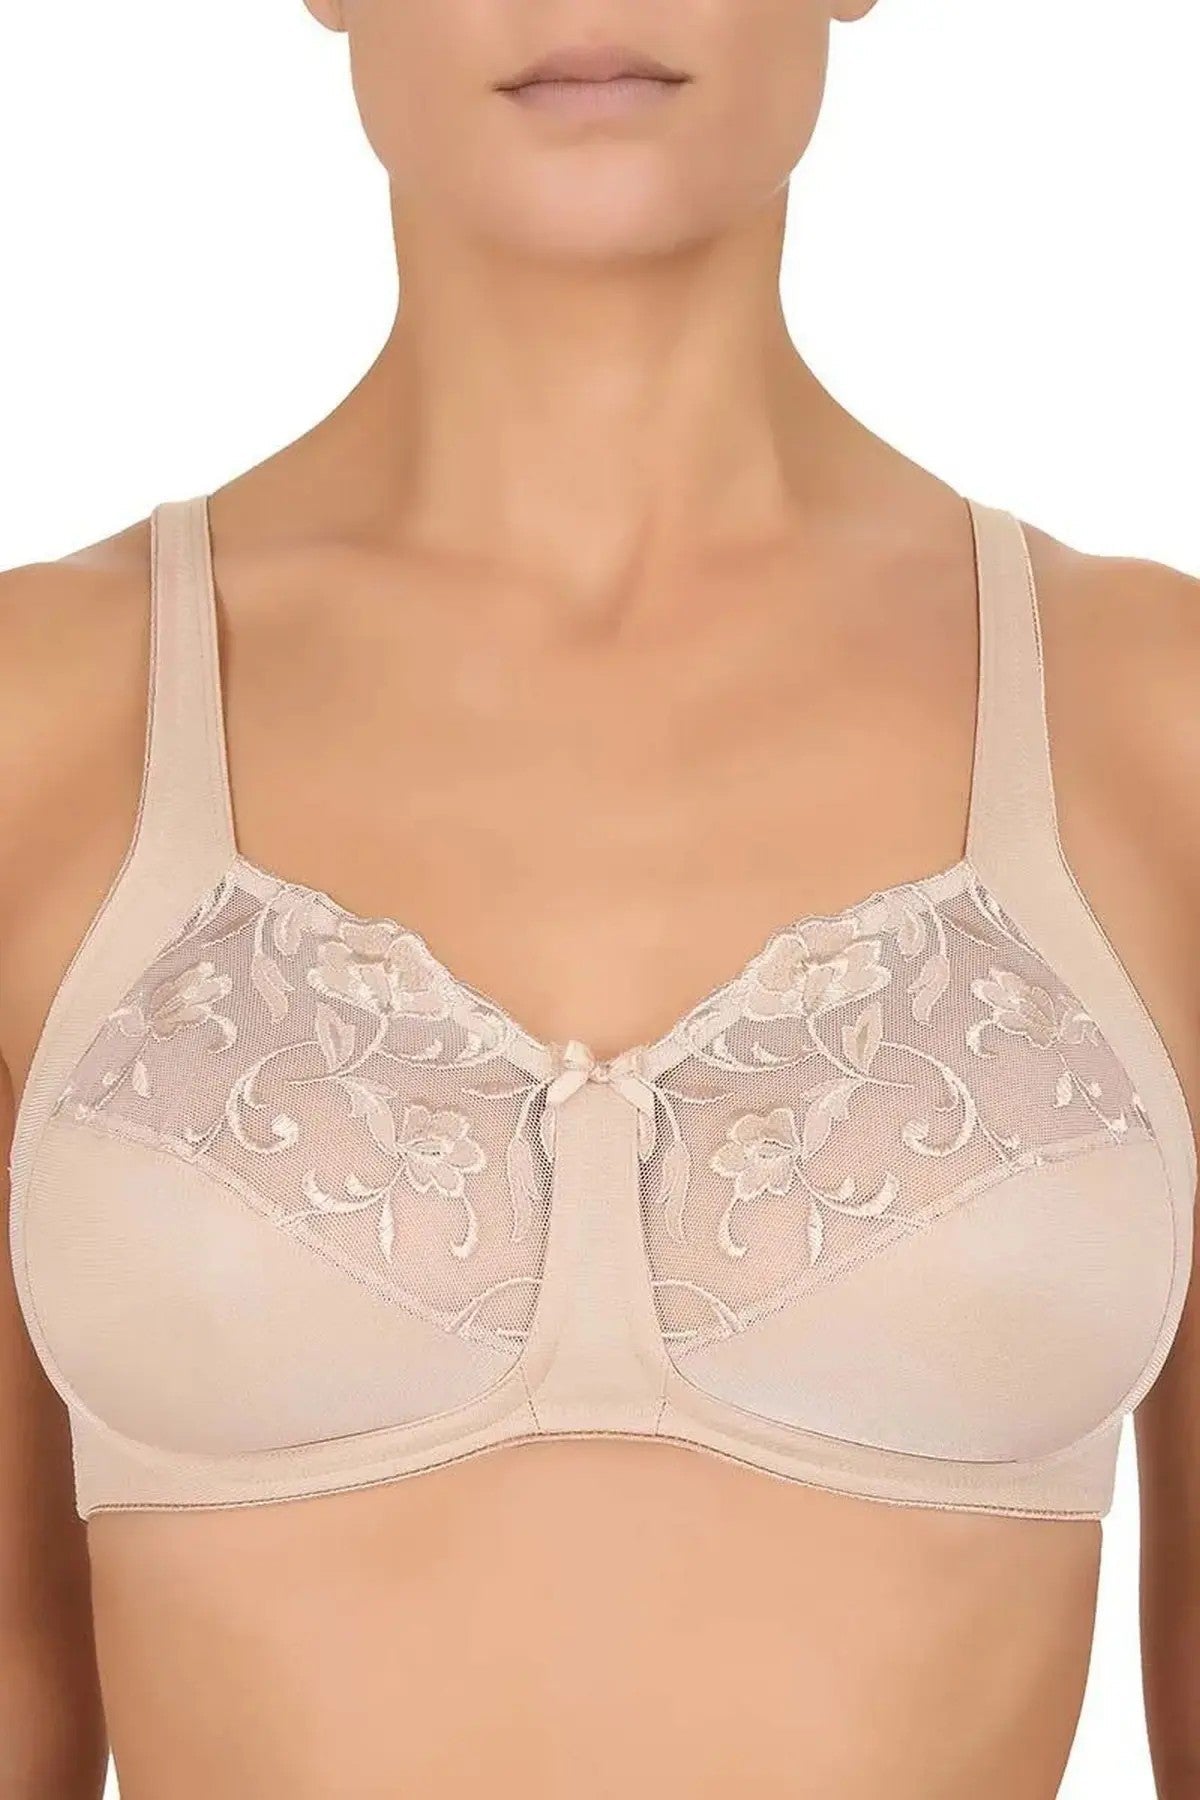 Felina Joy wired bra 048 Vanilla buy for the best price CAD$ 109.00 -  Canada and U.S. delivery – Bralissimo